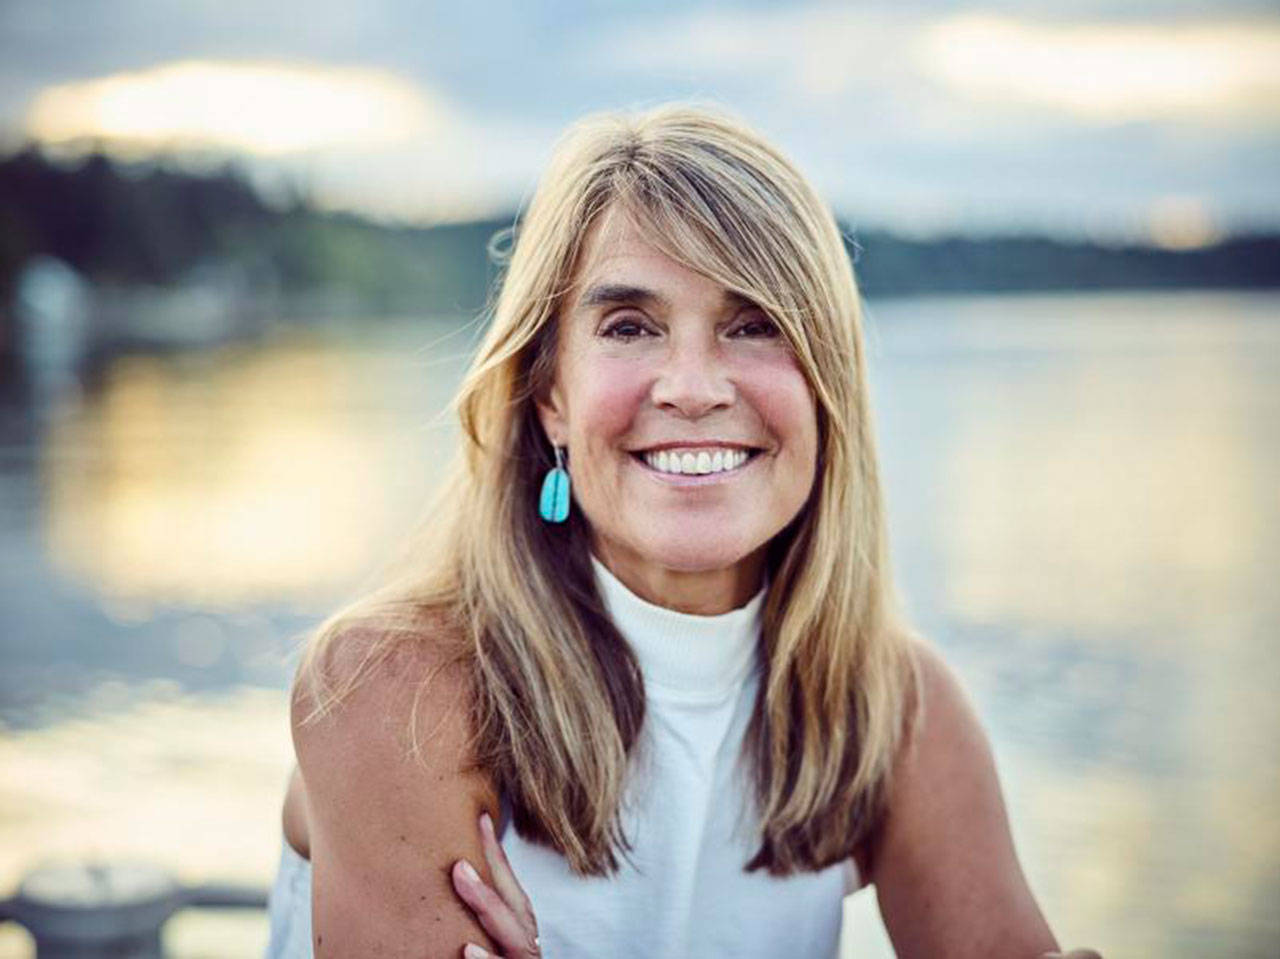 Image courtesy of Sasquatch Books | Former Bainbridge resident Nancy Blakey will visit Eagle Harbor Book Company on Thursday, May 17 to read from her new Northwest guide book “By the Shore: Explore the Pacific Northwest Like a Local.”